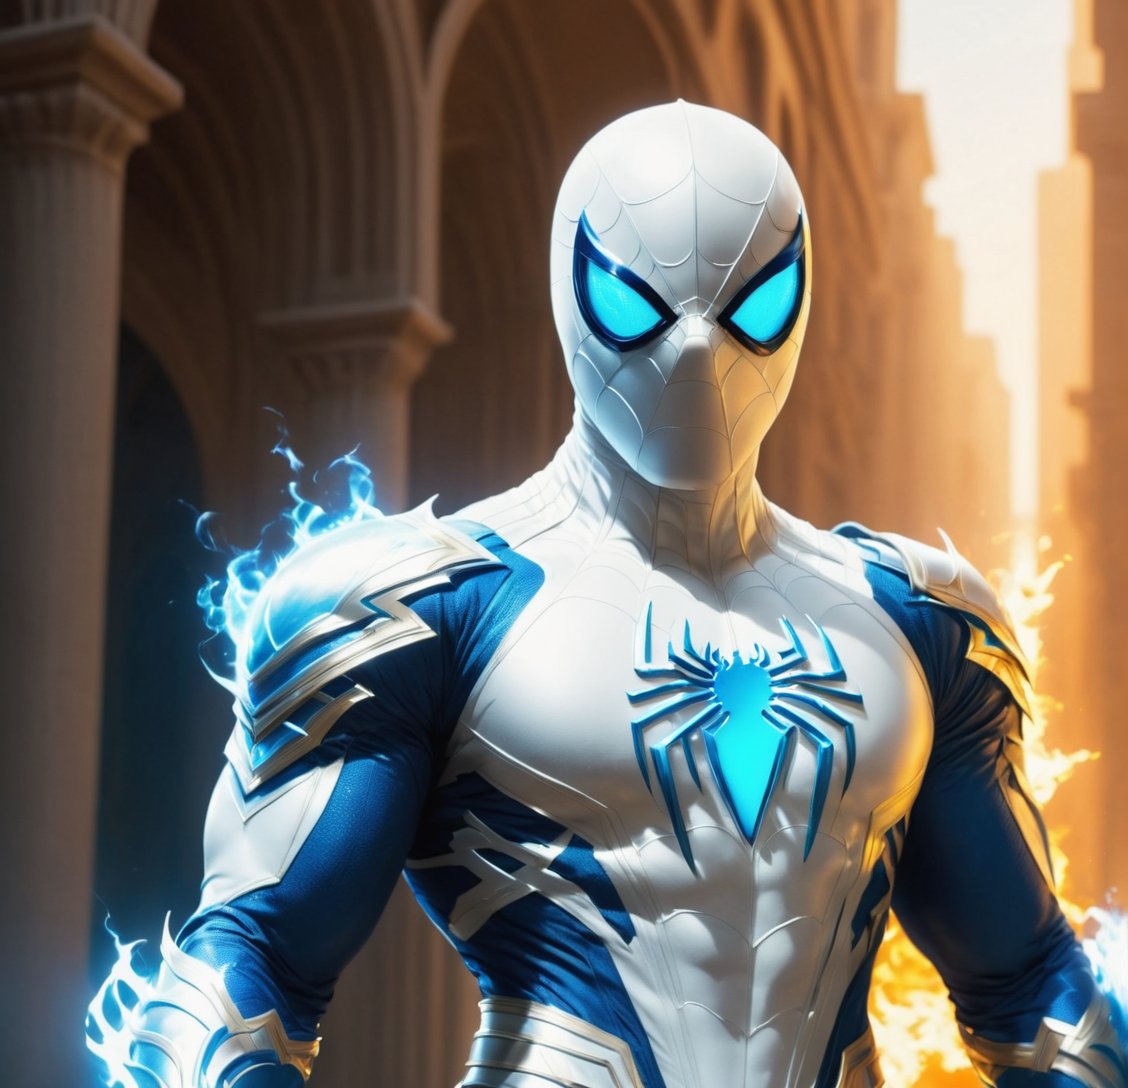 white SPIDERMAN with WHITE mask, wears a WHITE suit, a WHITE mask, uses two blue fire swords, one in each hand, standing on a golden path, holds a blue fire sword in his right hand and a very shiny transparent blue sword on his left hand, muscular, muscular arms, best quality, professor workmanship, 8k, uhd, bright daylight, realistic style, he has a letter H on his suit, hyper-detailed muscles,  DAY lighting, he has a belt with letter H buckle,rmspdvrs